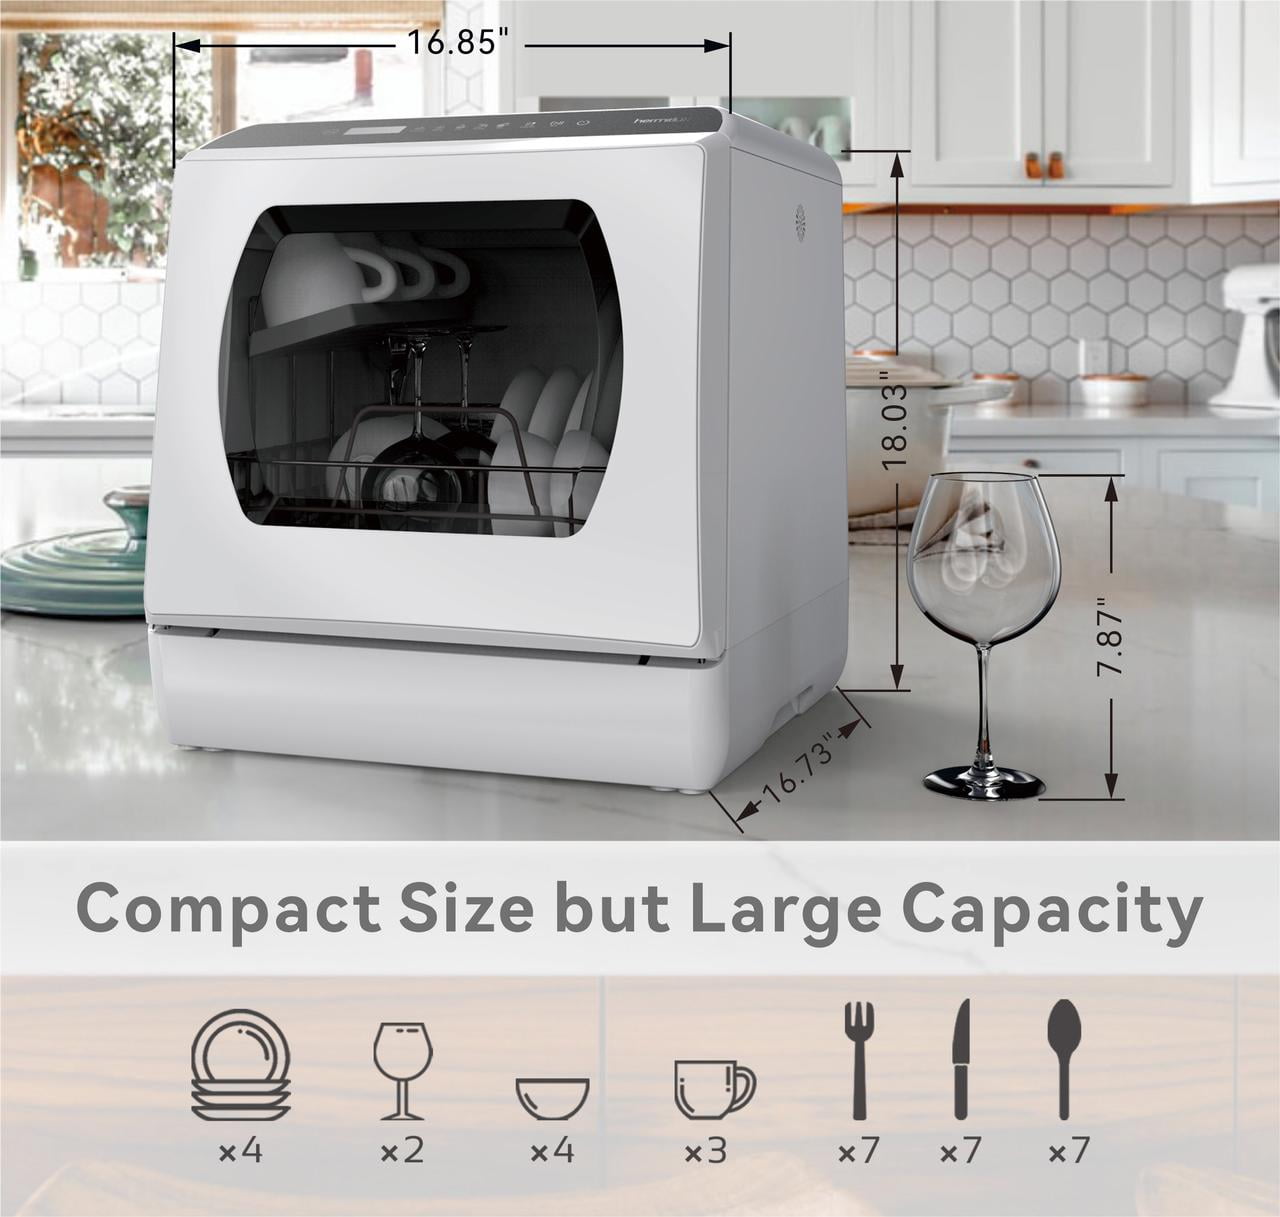 Portable Countertop Dishwasher, 5 Washing Programs Glass Door Mini Dishwasher with 5-Liter Built-in Water Tank, Baby Care, Air-Dry Function & Fruit Wash for Small Apartments, Dorms, RVs -White - 2